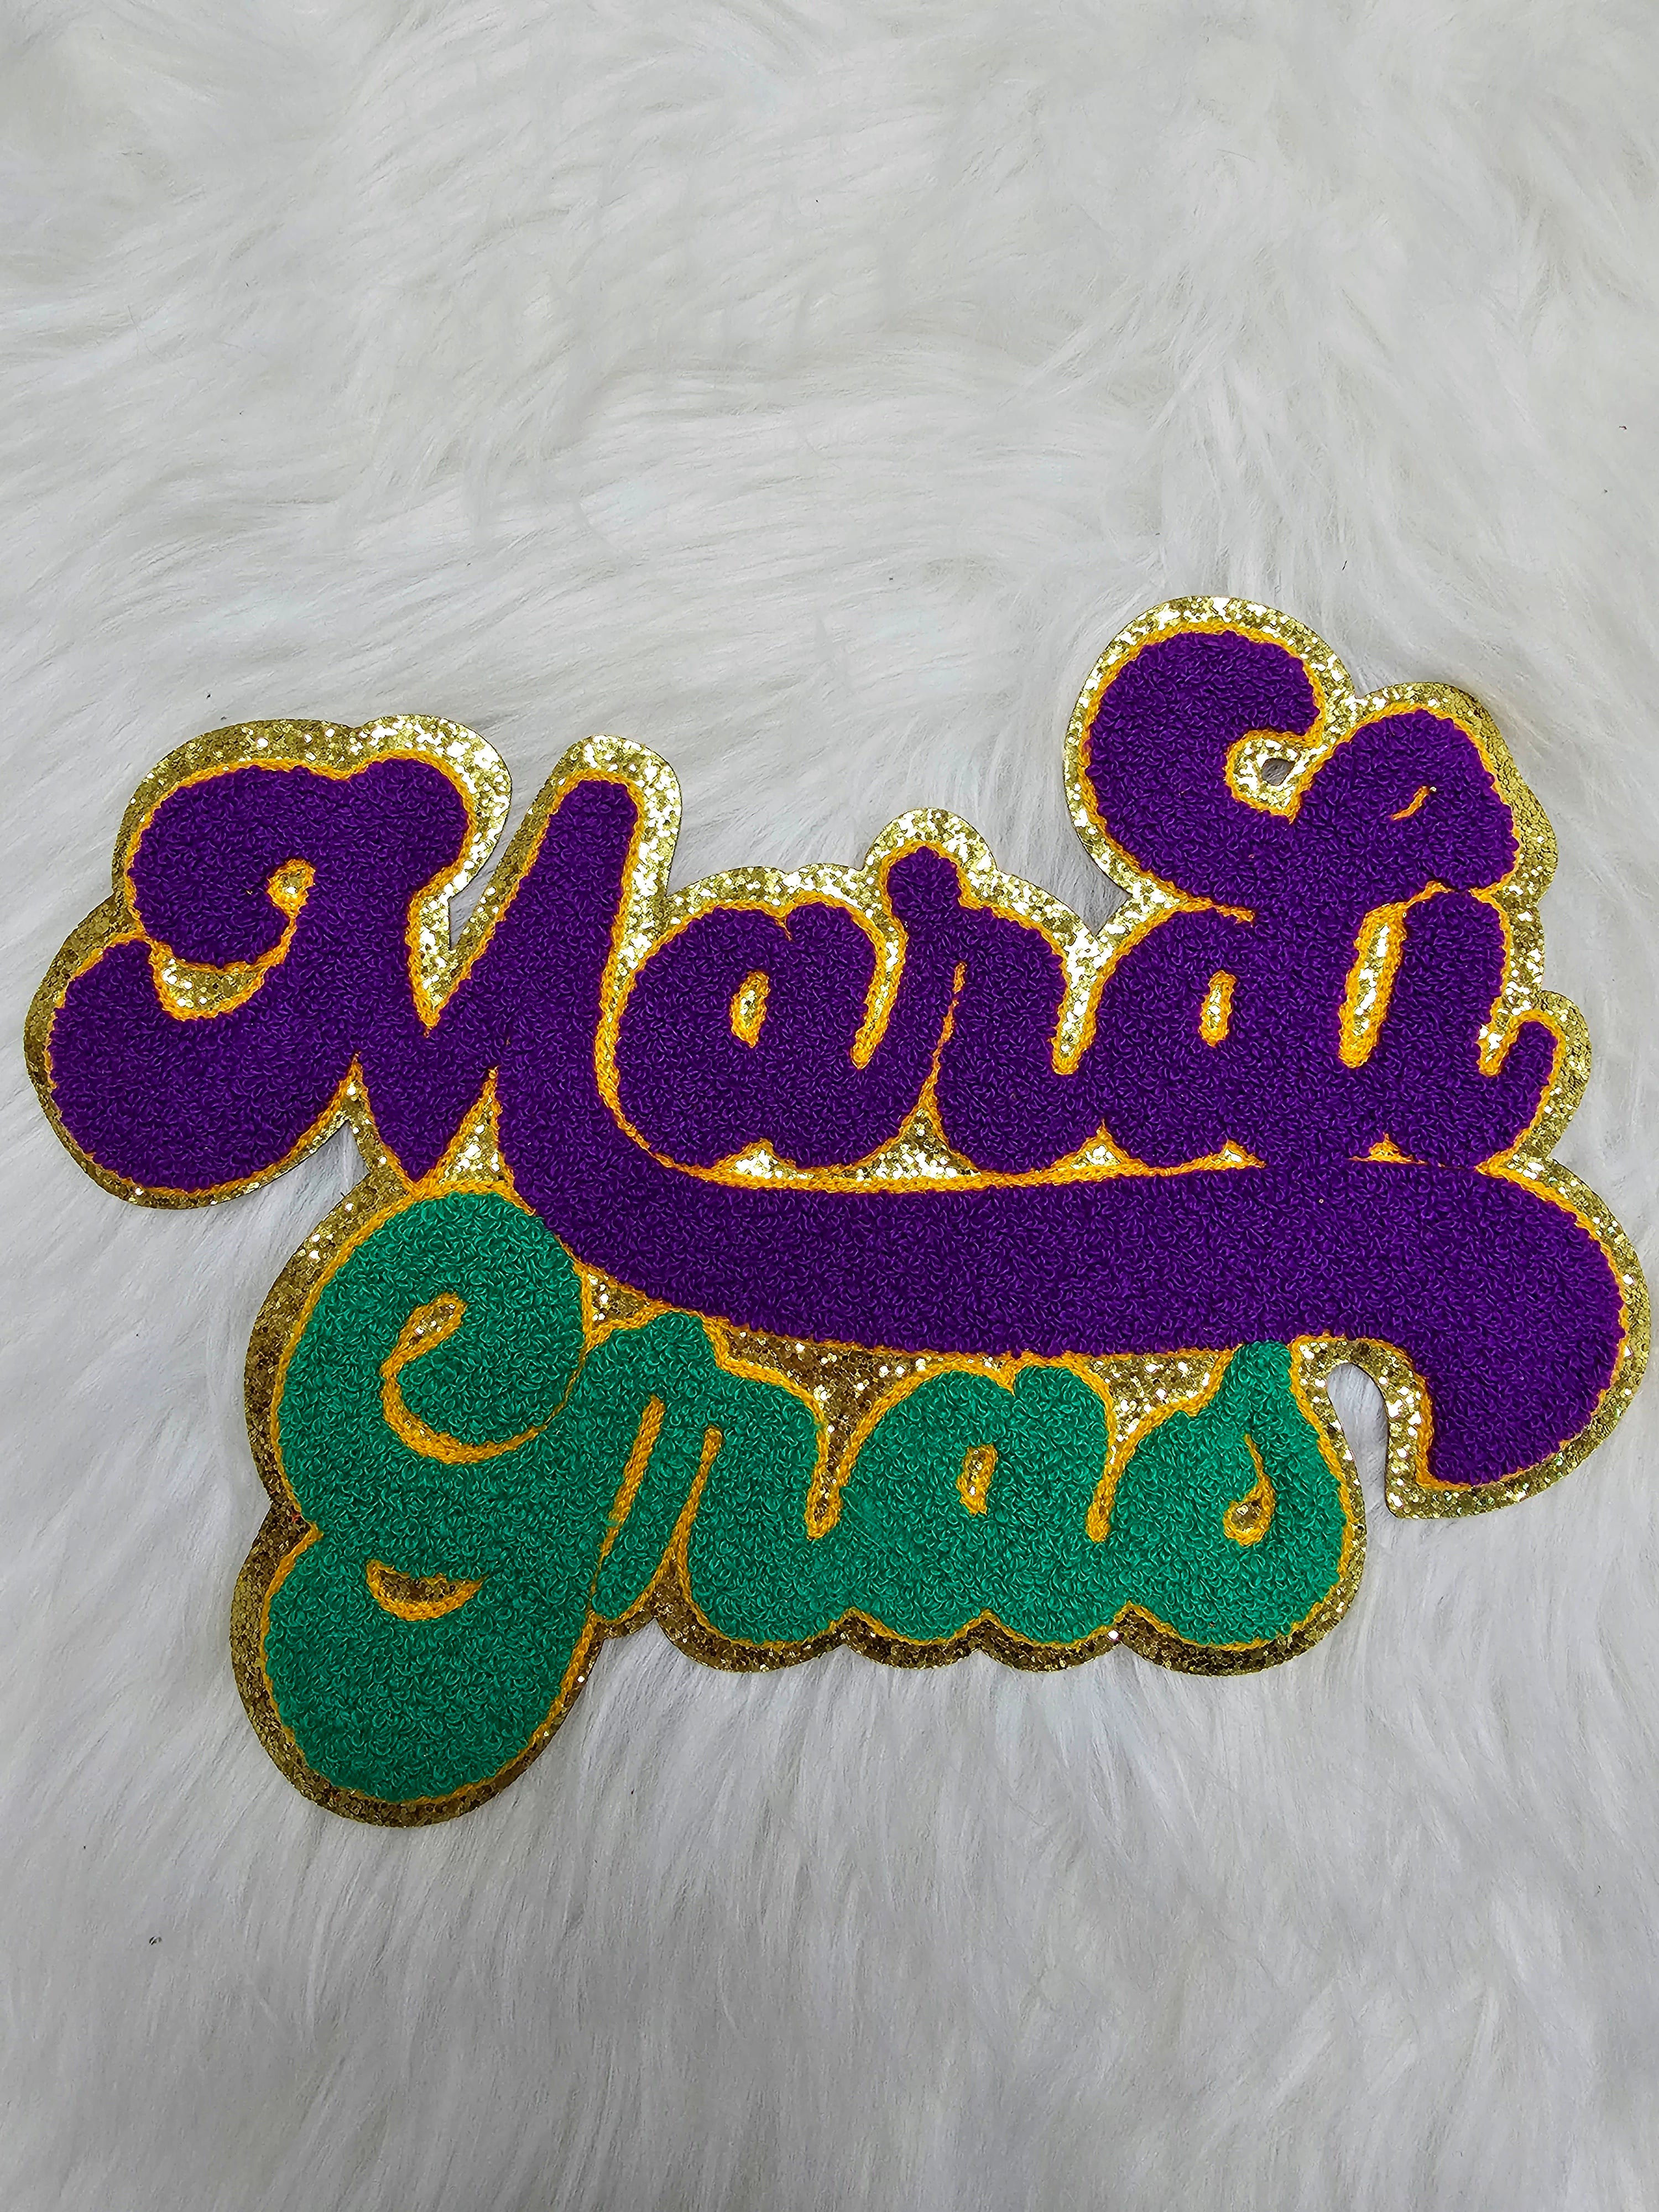  MARDI GRAS PATCH - Iron On Embroidered Applique/Holiday,  Celebration